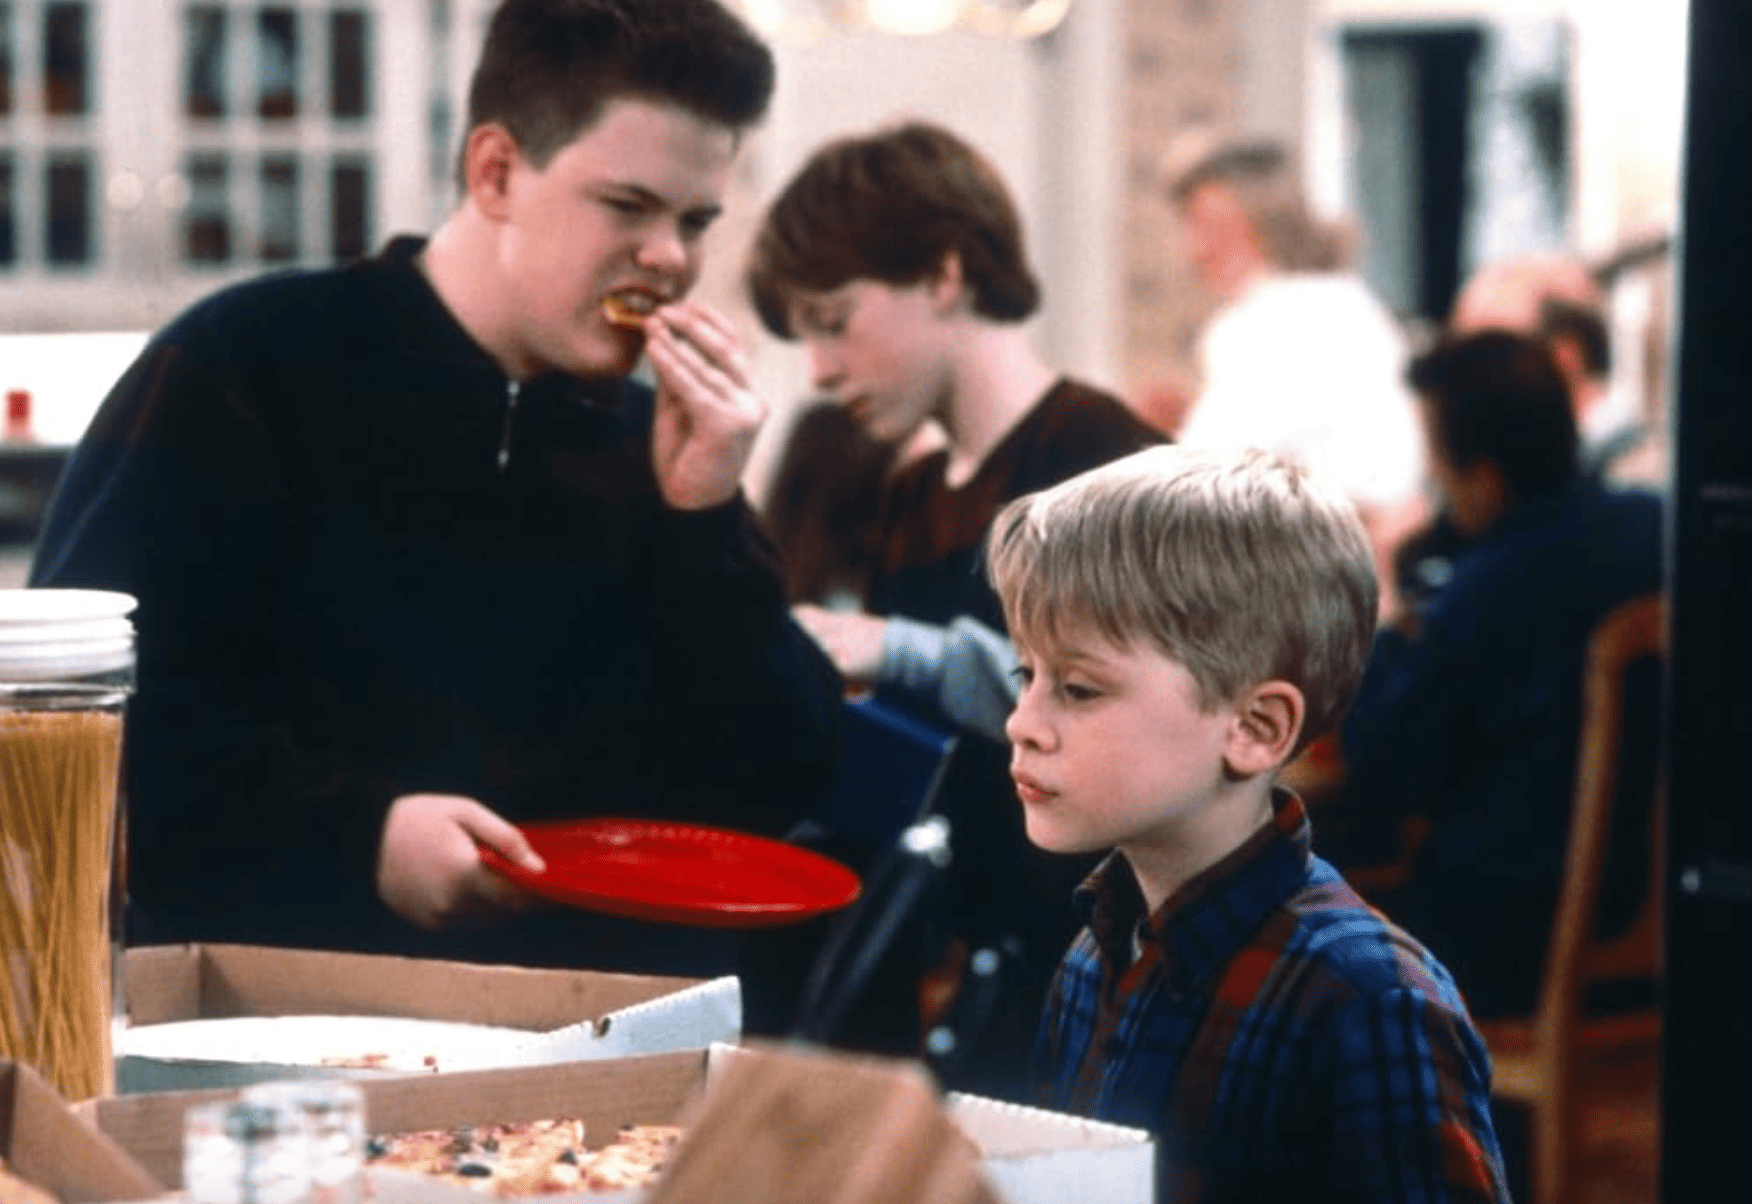 One kid fends for himself at a chaotic family dinner in this image from 20th Century Fox.